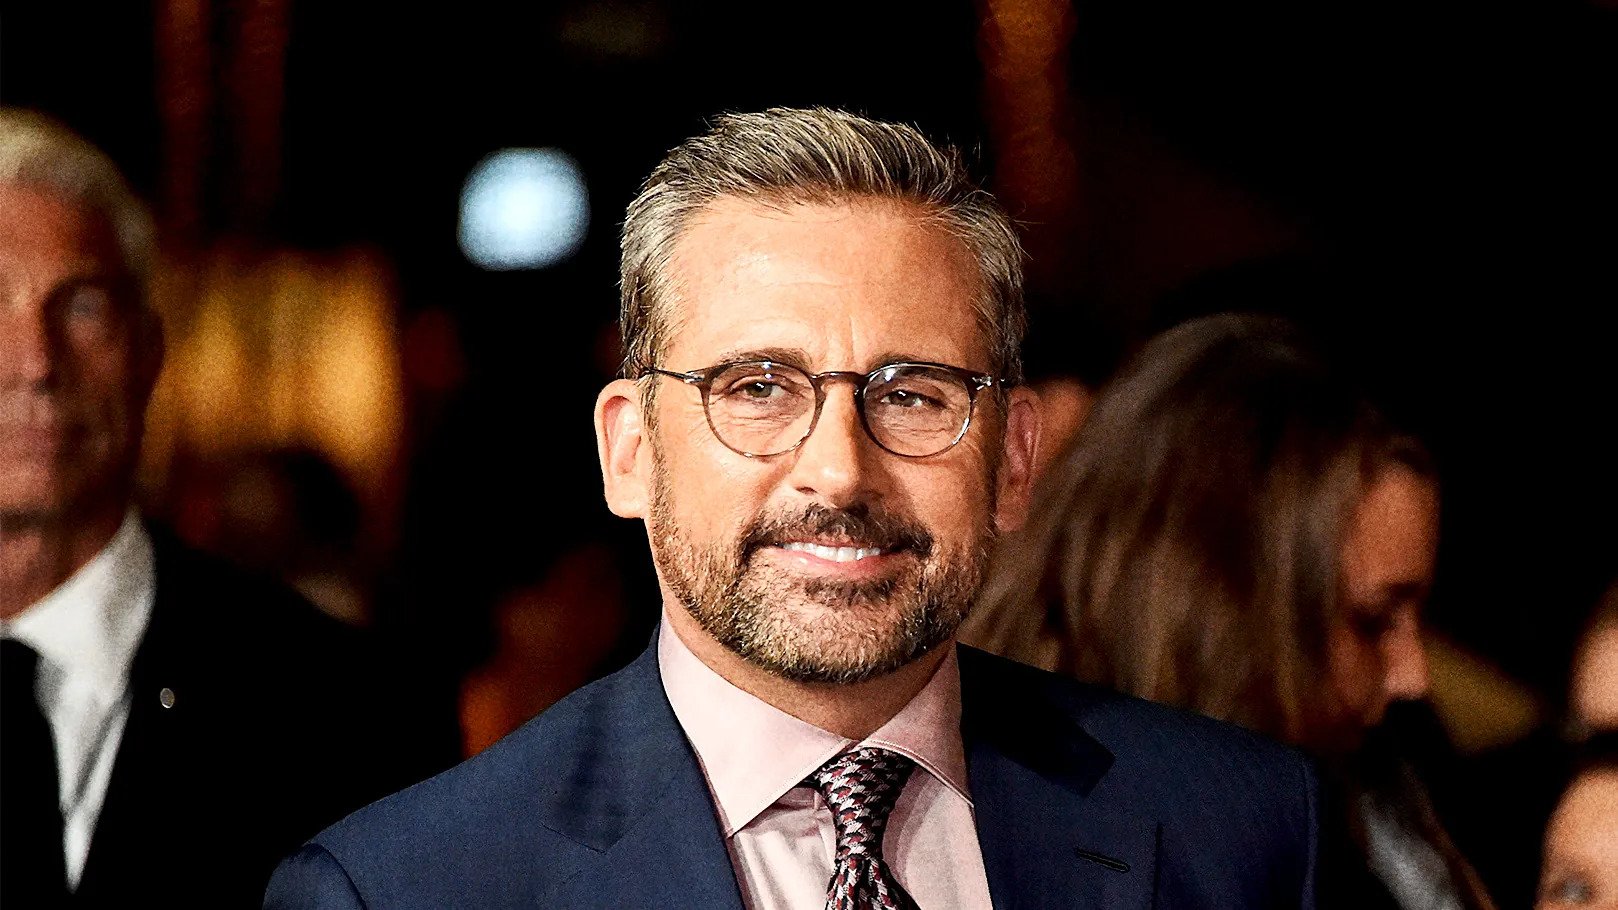 40-facts-about-steve-carell